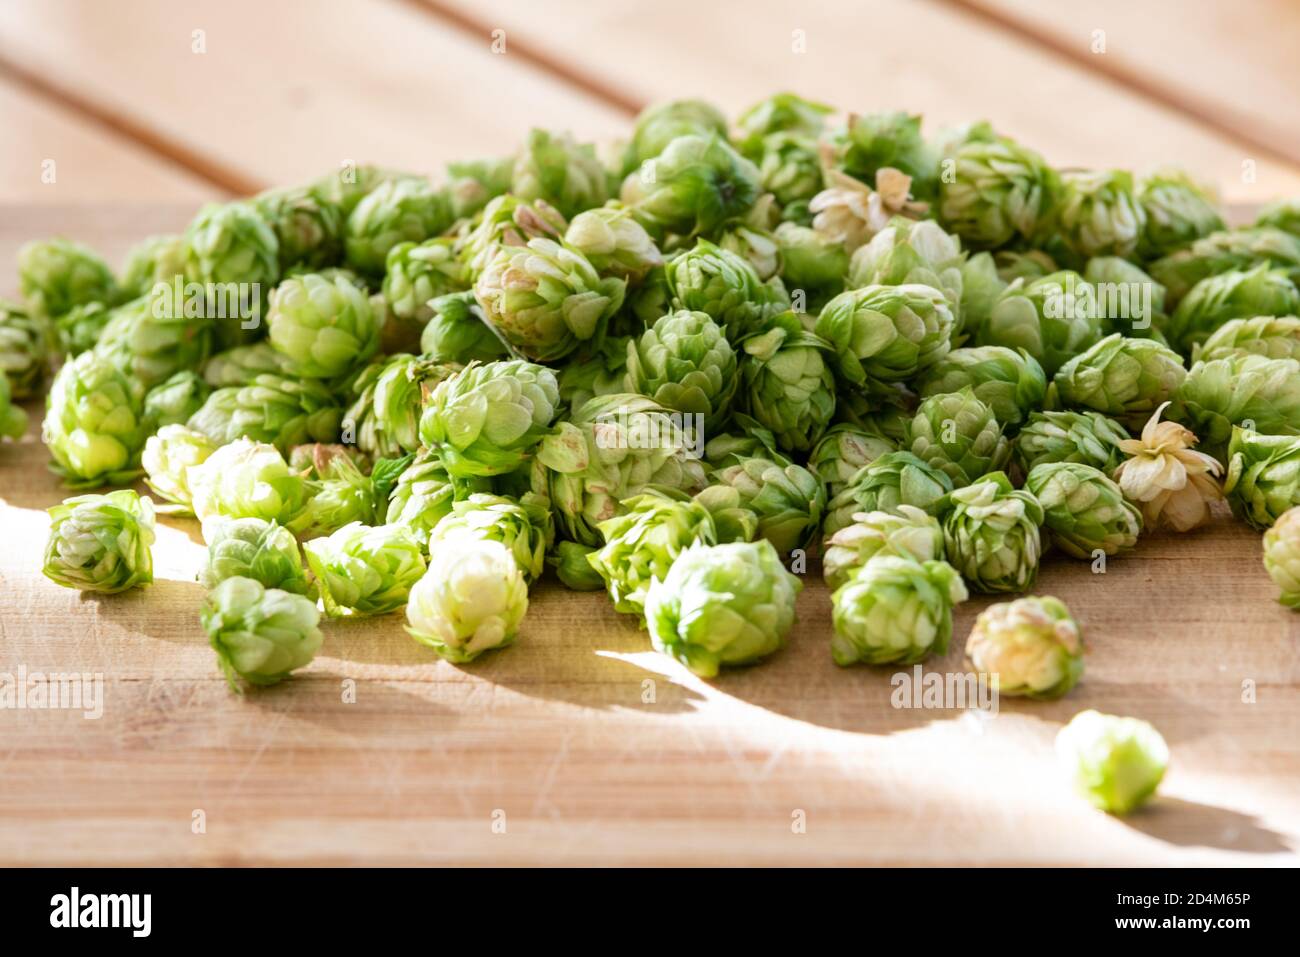 Hops are one of the main ingredients of beer. Stock Photo